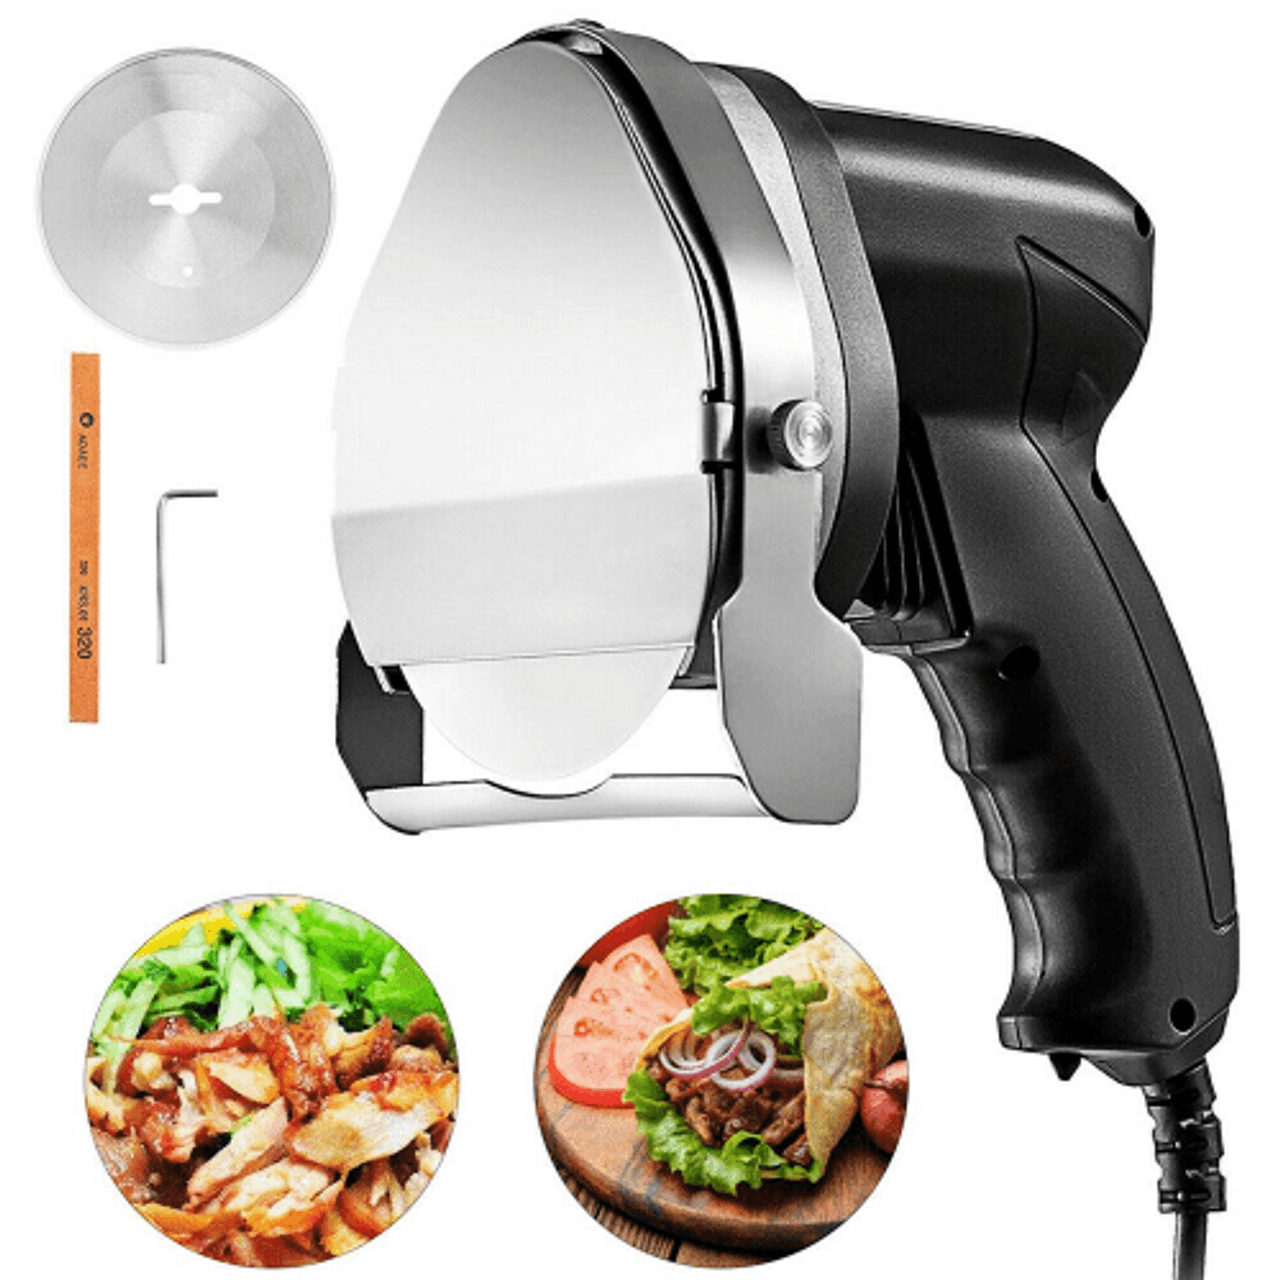 110V Electric Shawarma 80W Professional Turkish Kebab Knife Stainless Steel Commercial Gyro Cutter 2800 RPM With 2 Blades ?3.93/100mm Adjustable Thickness 0-8 mm